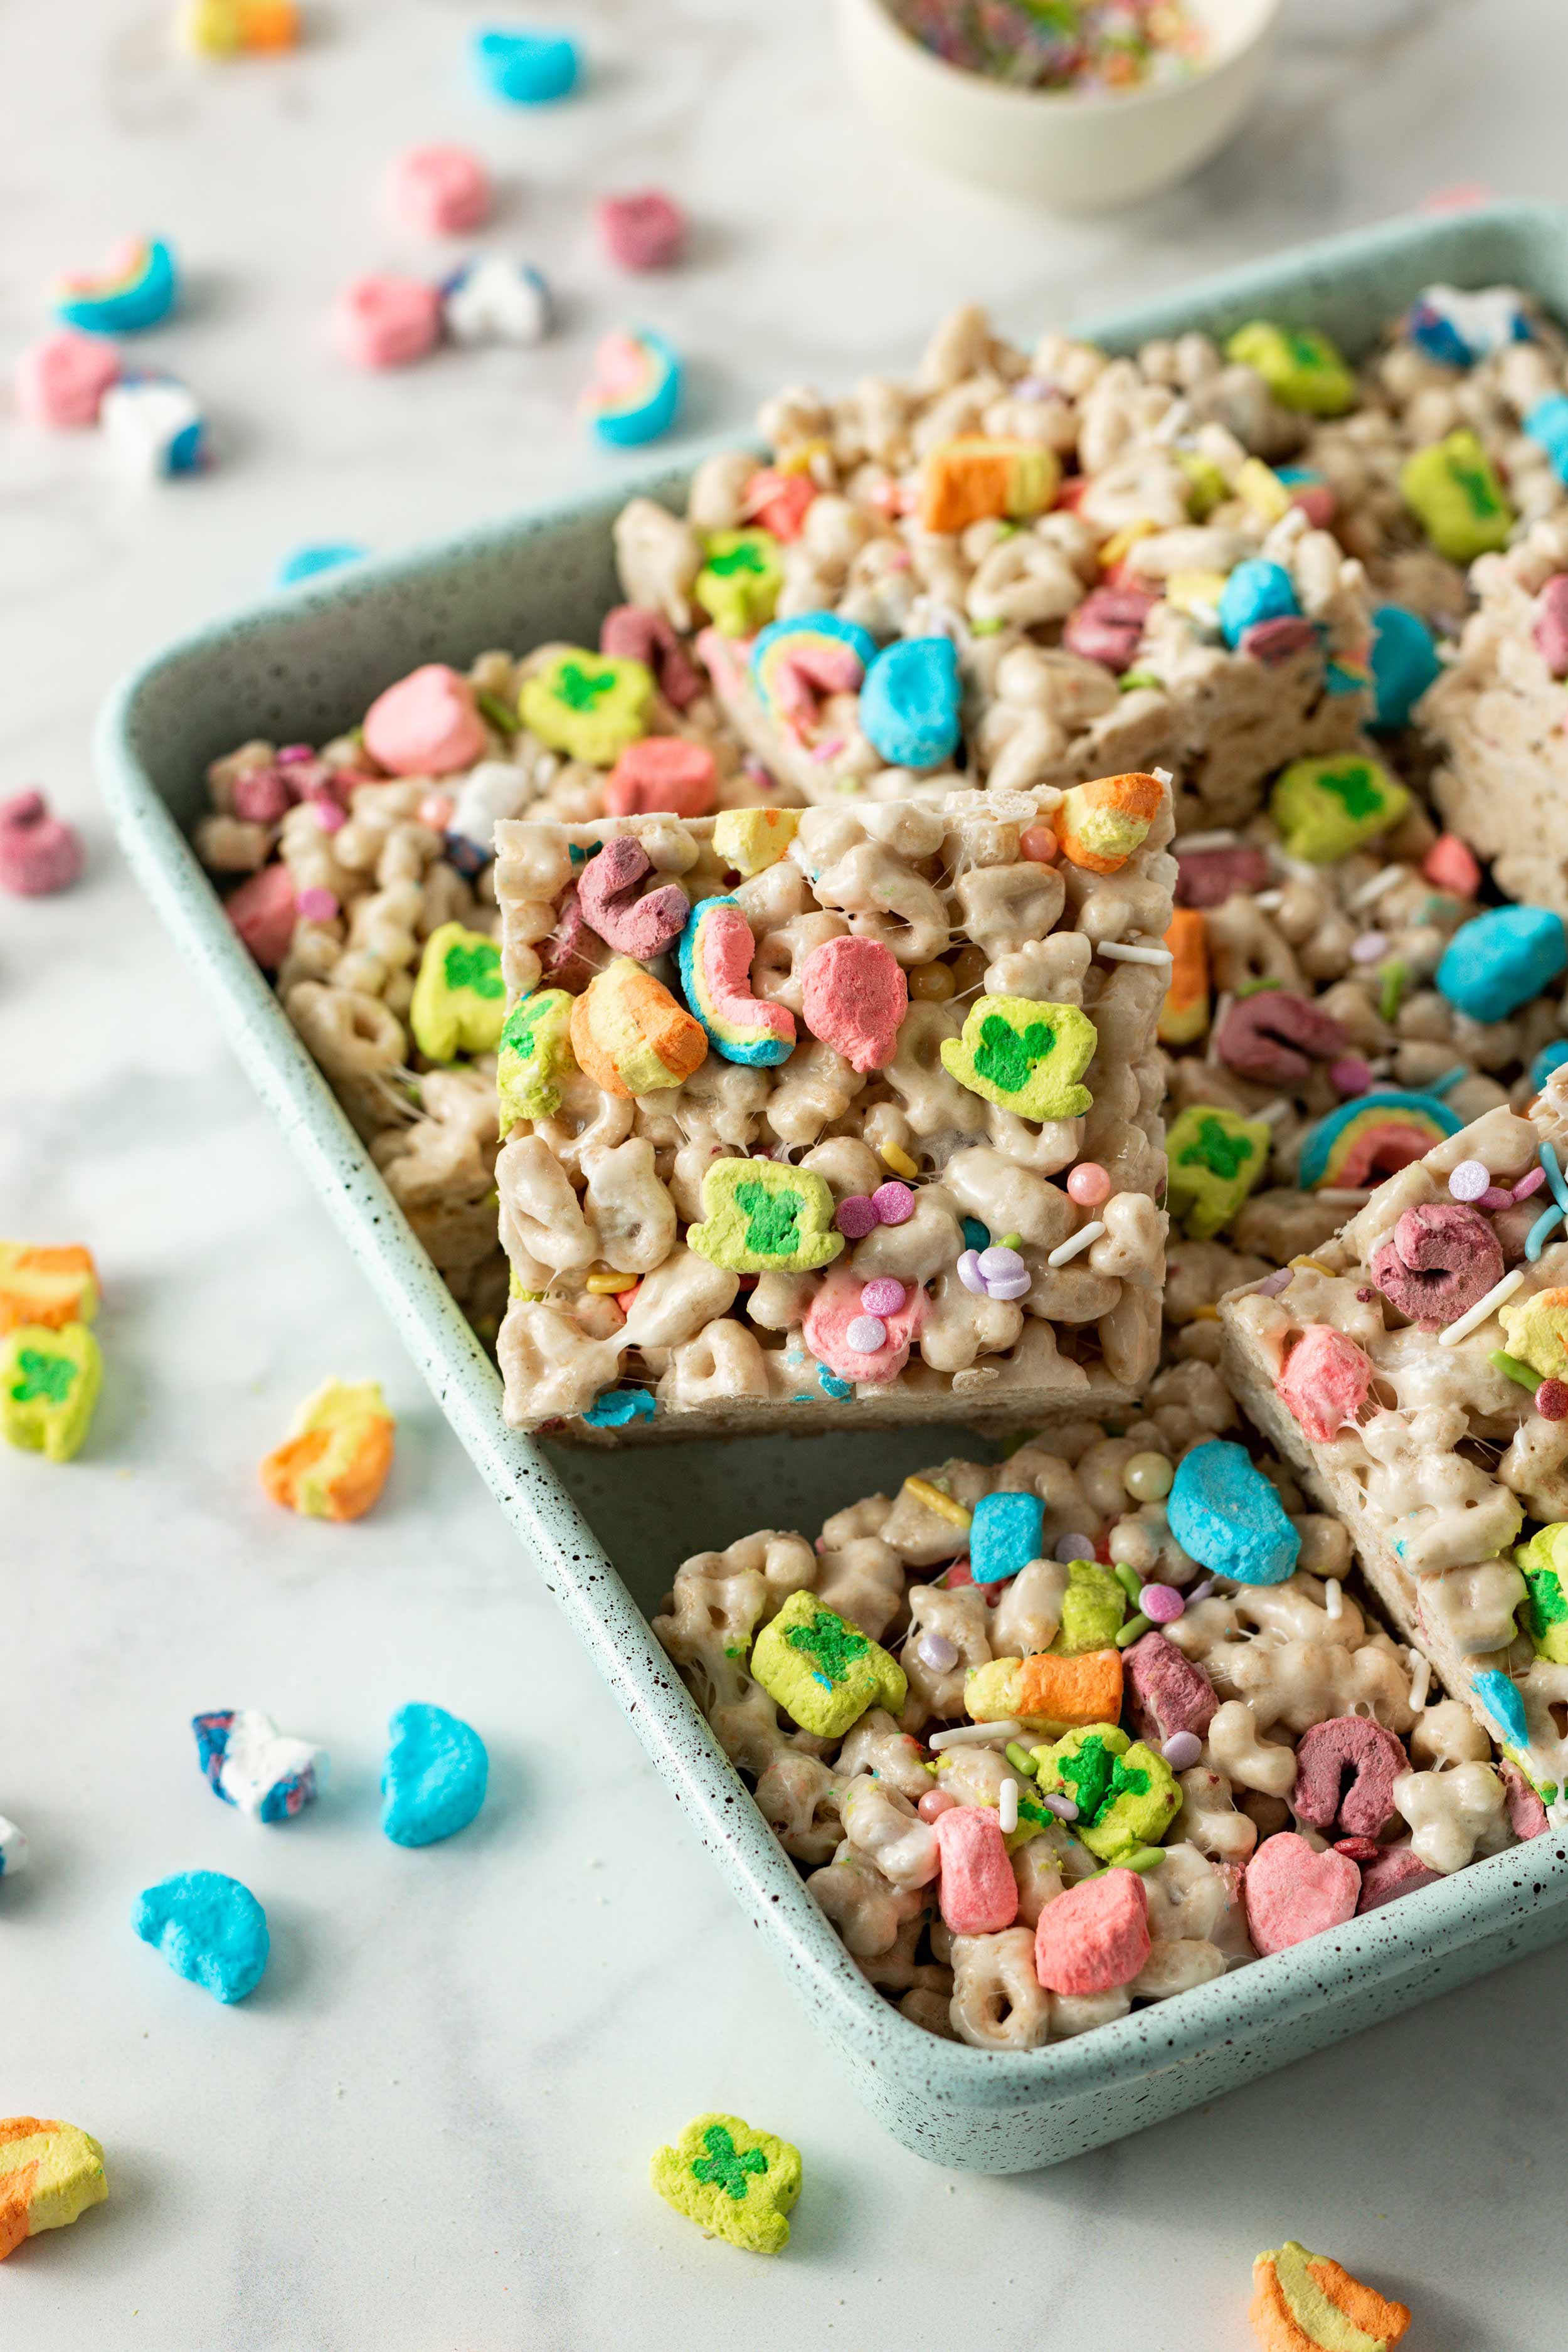 Lucky Charms Marshmallow Crispy Treats cut into squares in 9x9 baking tray